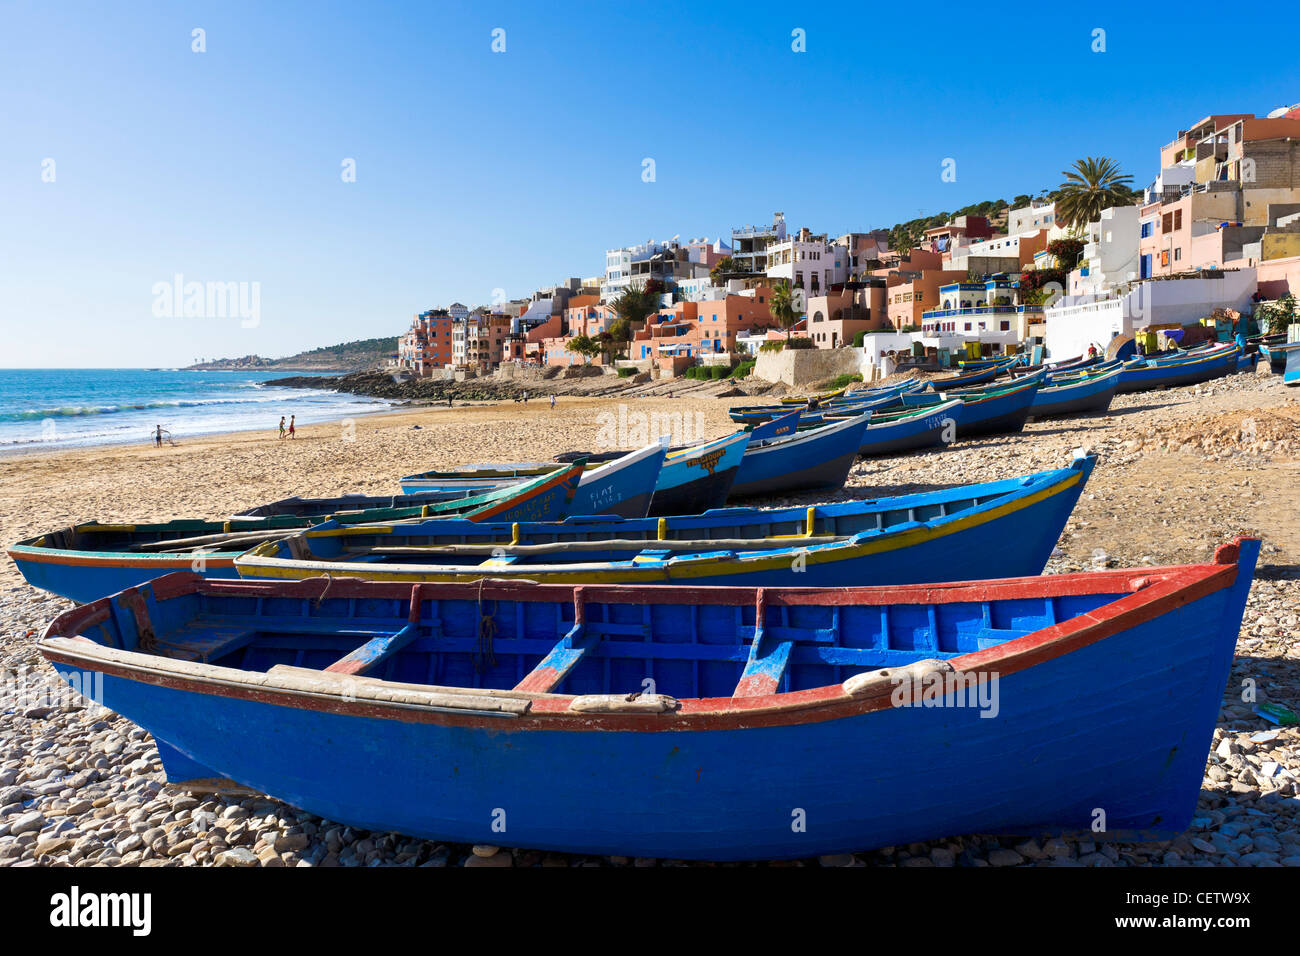 Town beach at Taghazout , north of Agadir, Morocco, North Africa Stock Photo